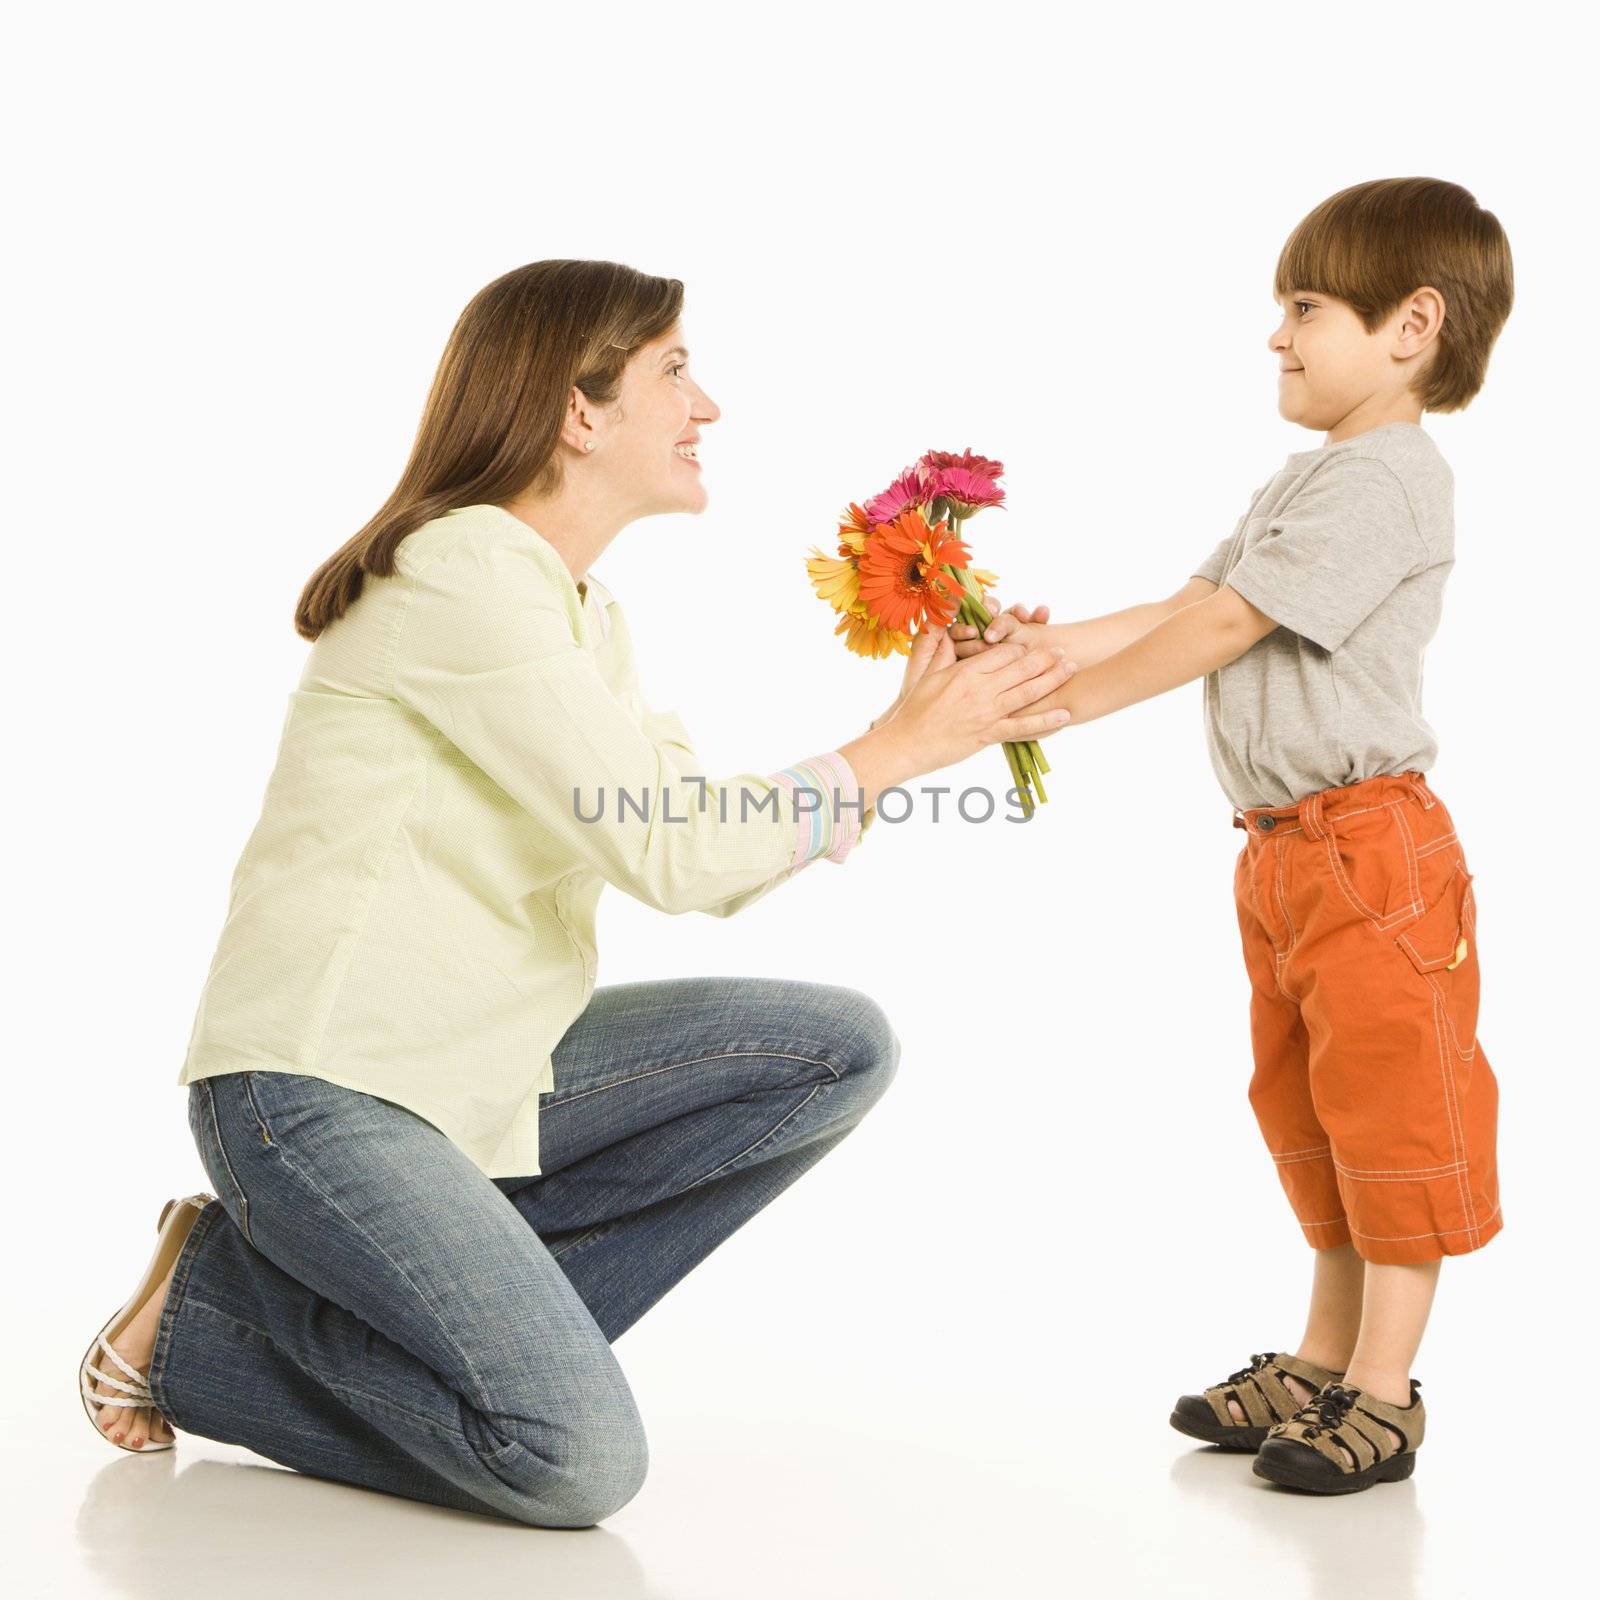 Son giving bouquet of flowers to mother.